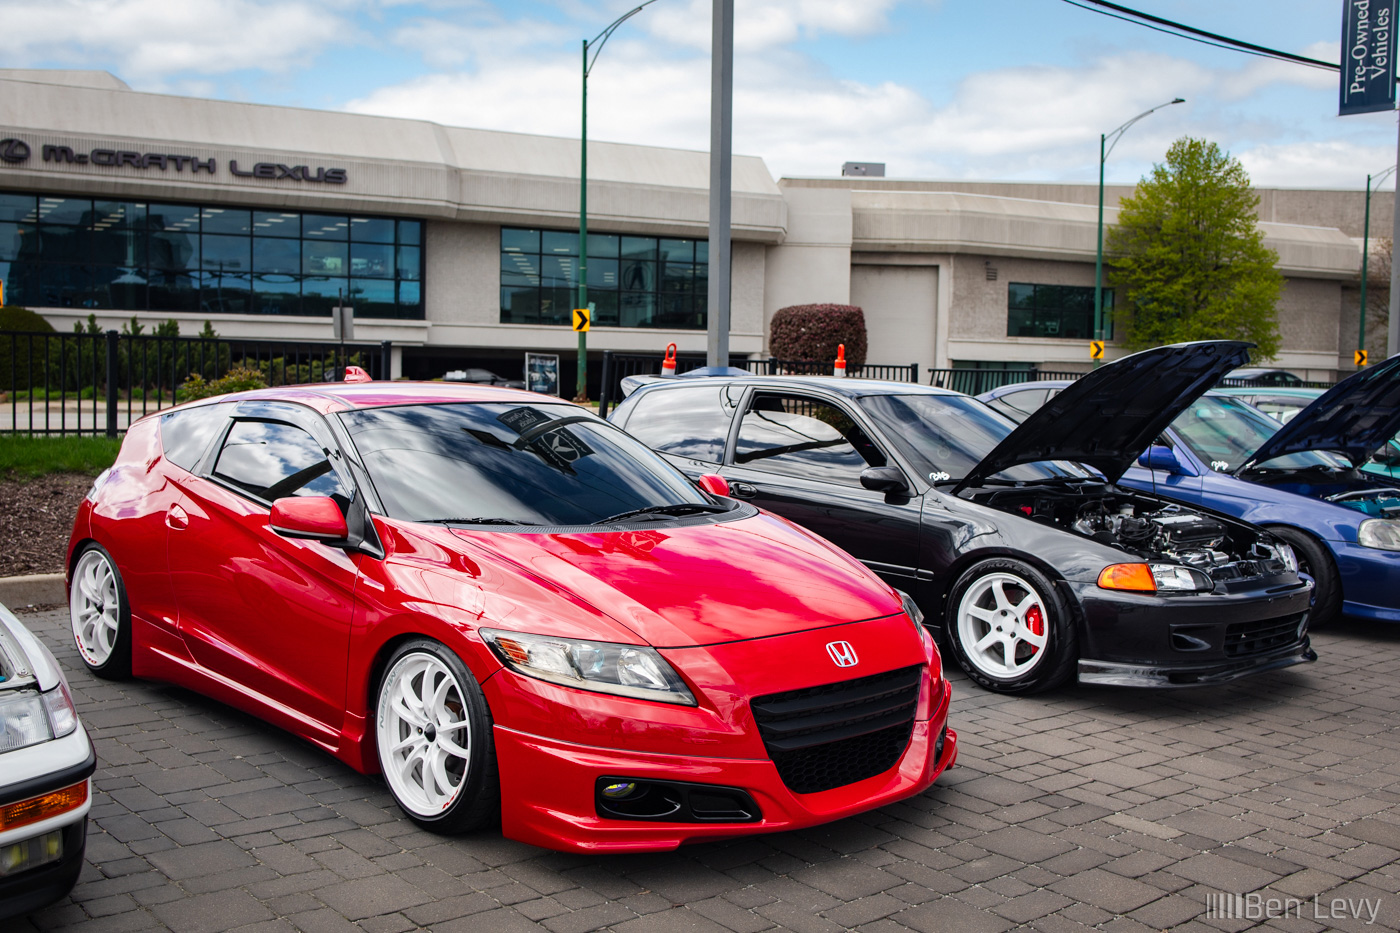 Red CR-Z and Black Civic Hatchback in Chicago